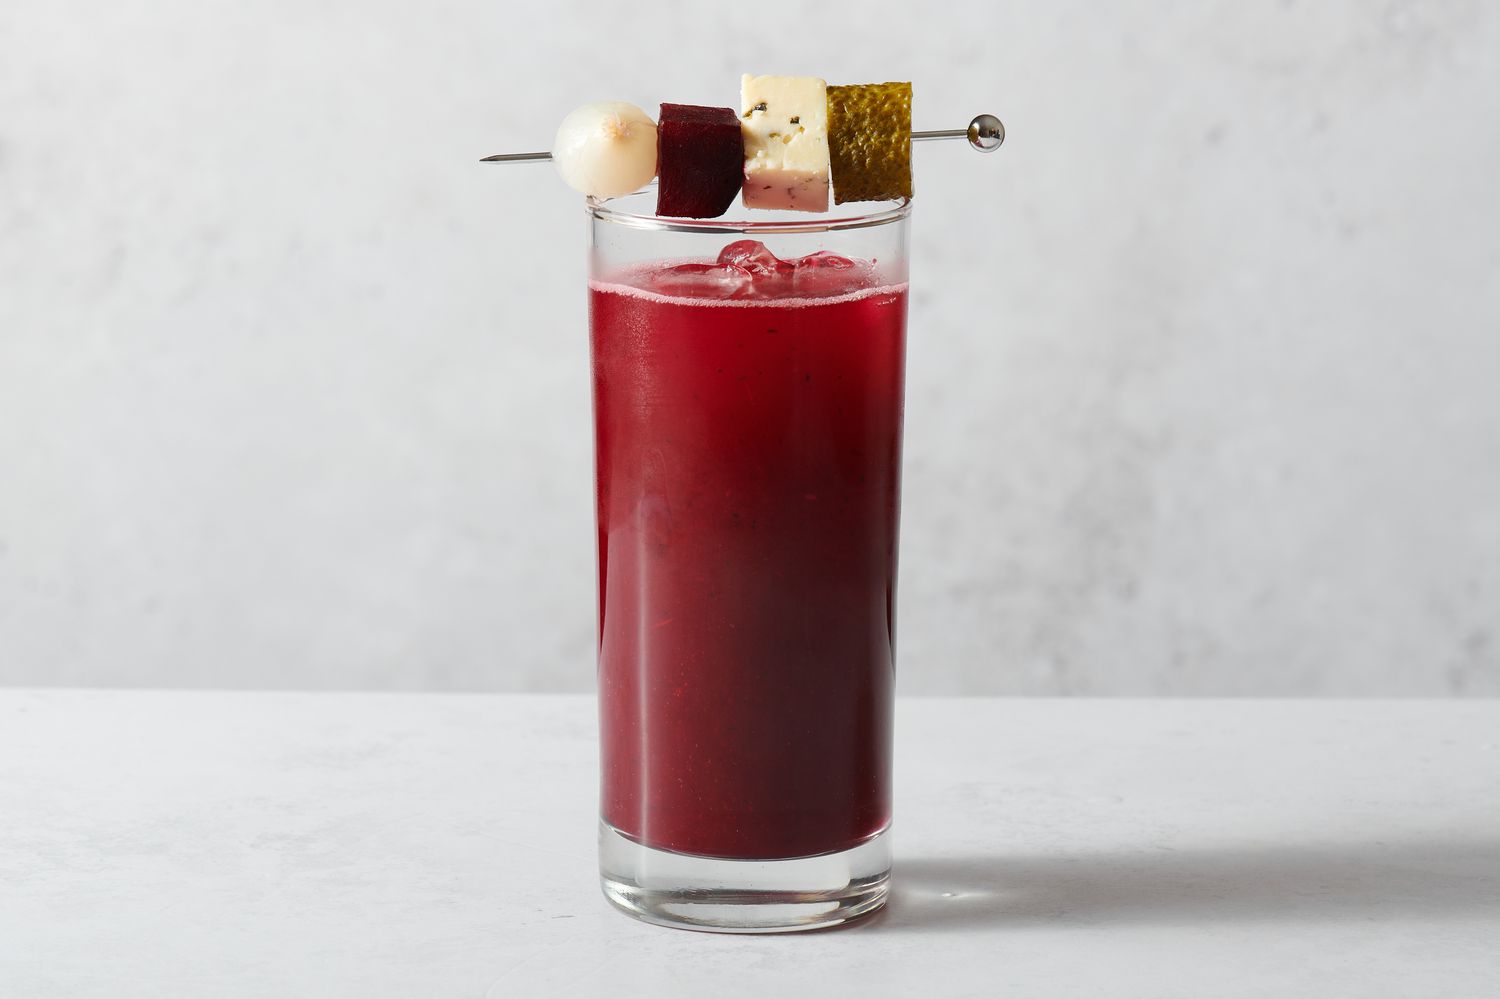 A Beet and Aquavit Bloody Mary garnished with roasted beets, cheese cubes, pickle slices, and pickled onions